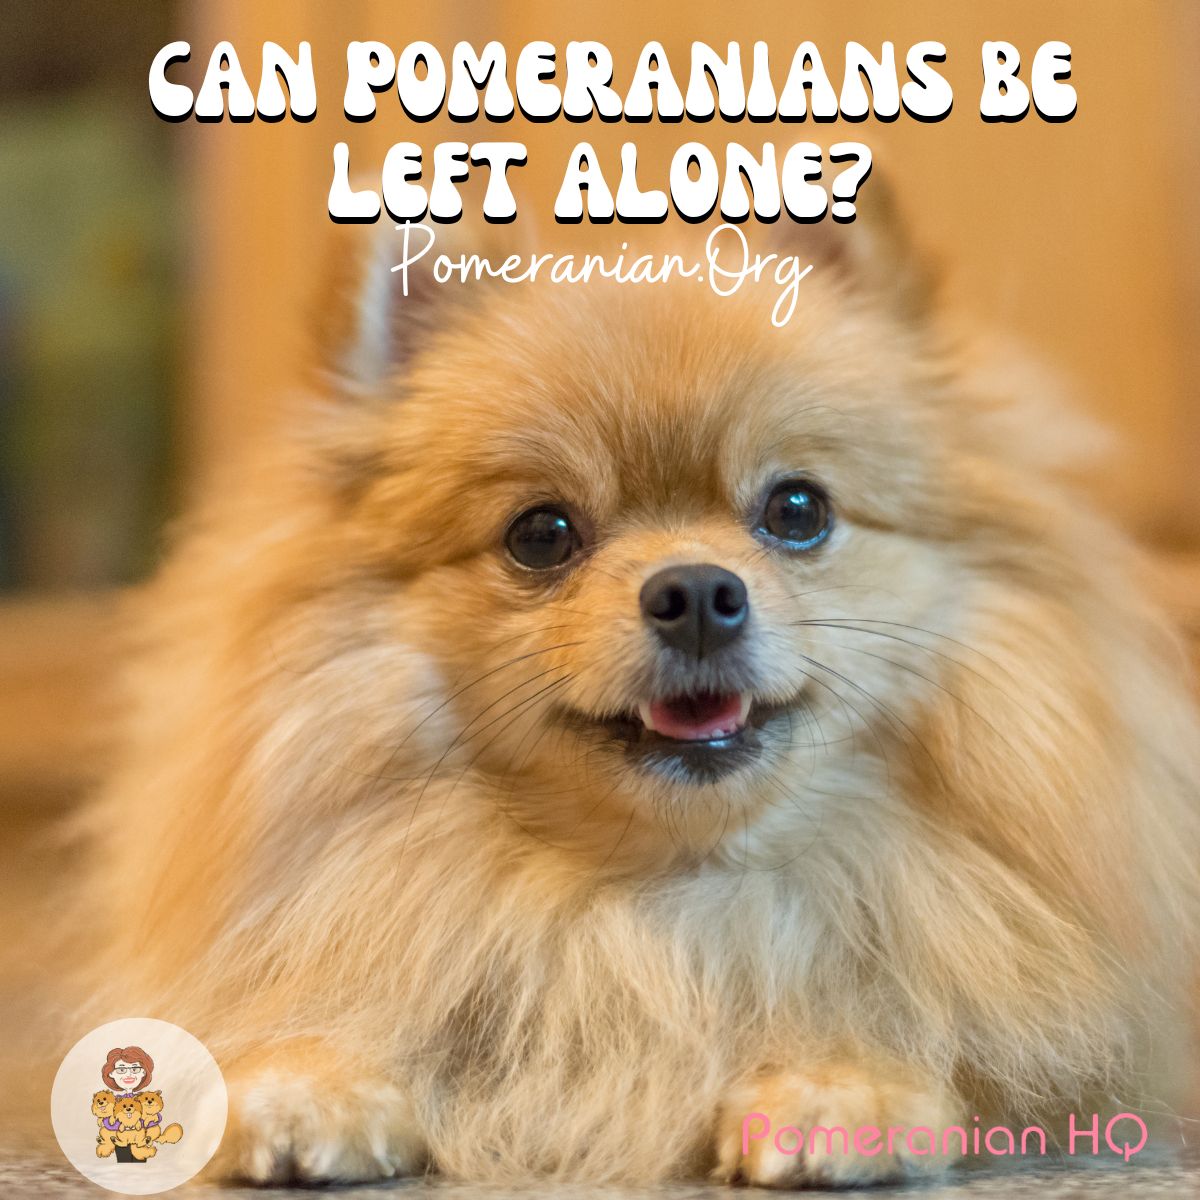 Can Pomeranians be left alone?